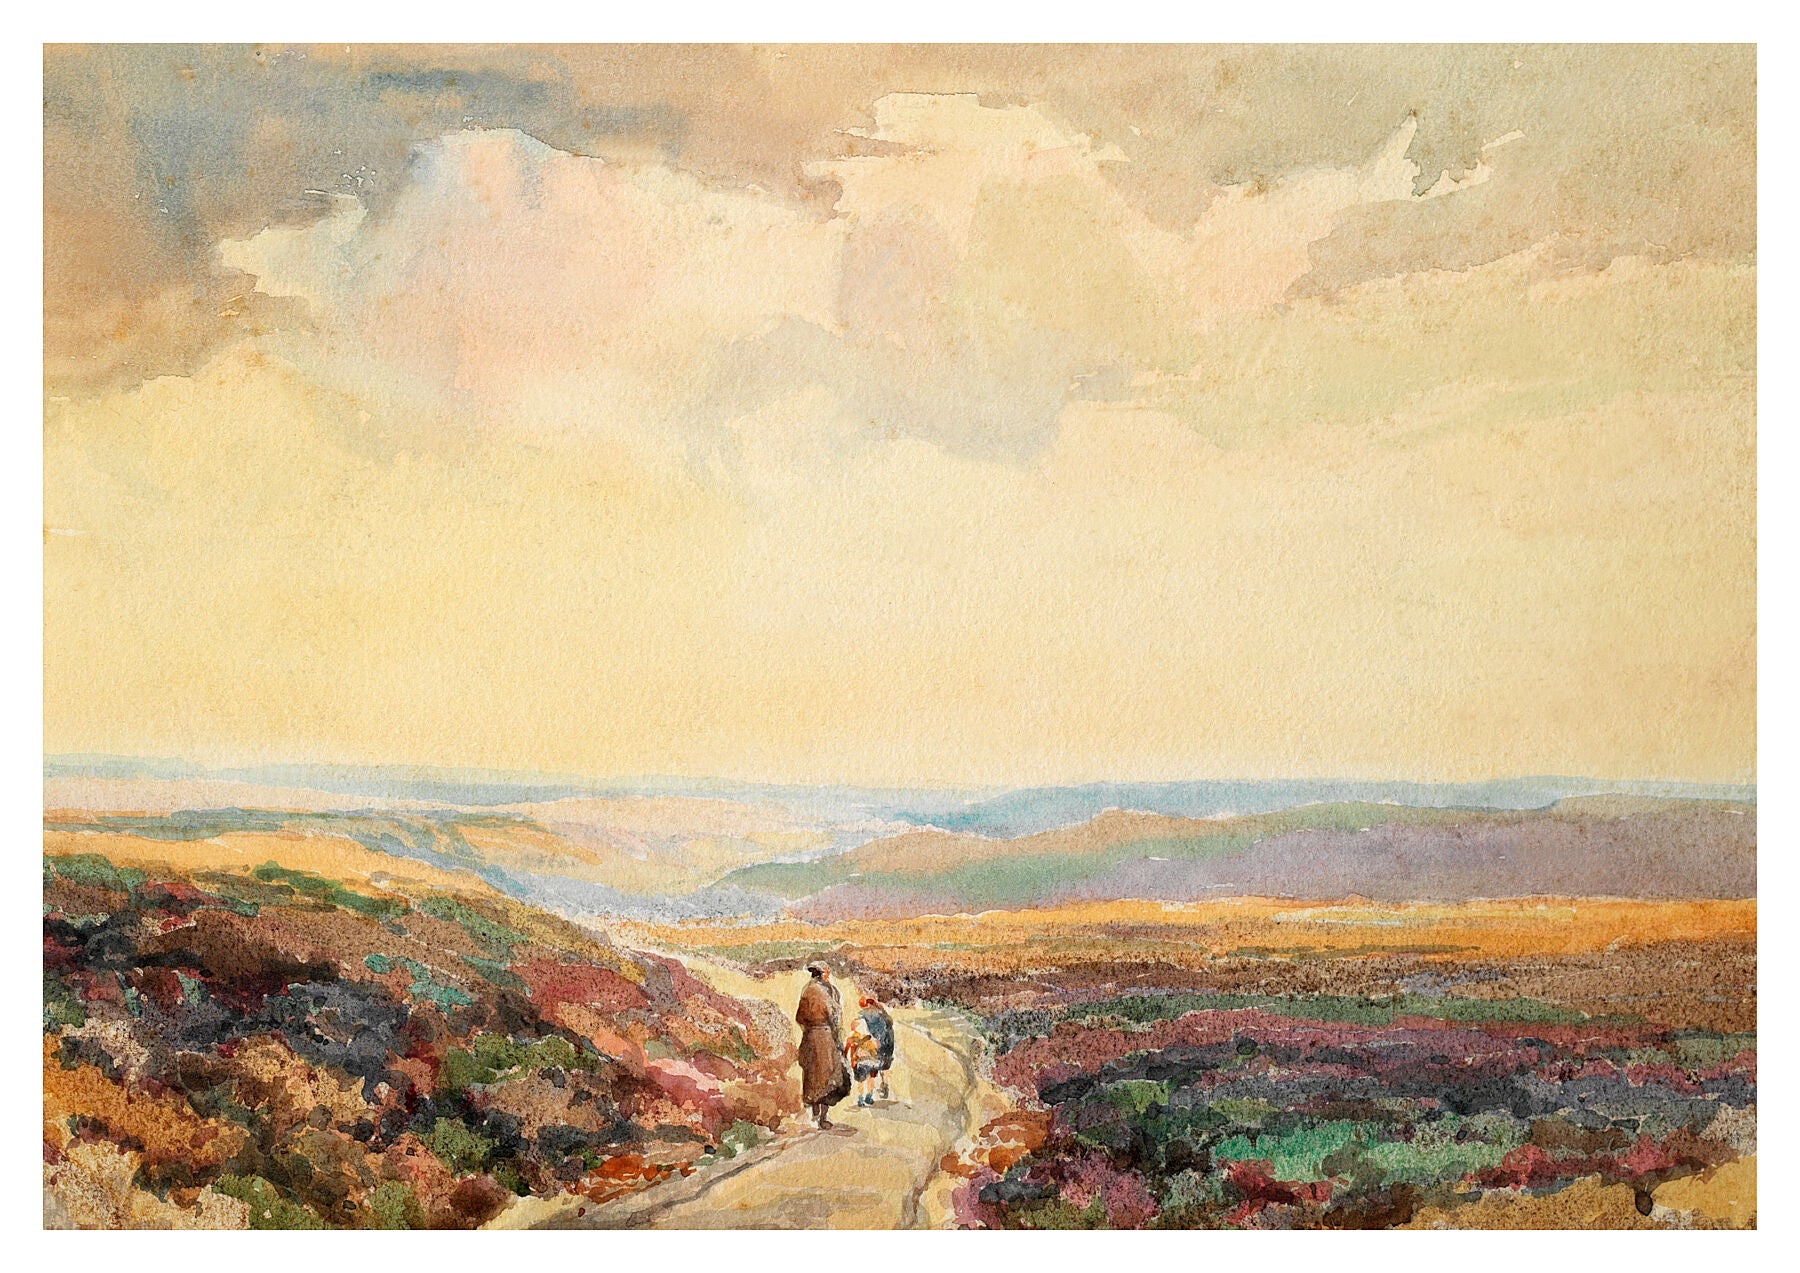 Reproduction watercolour painting of On The Way Home by Walter C Foster